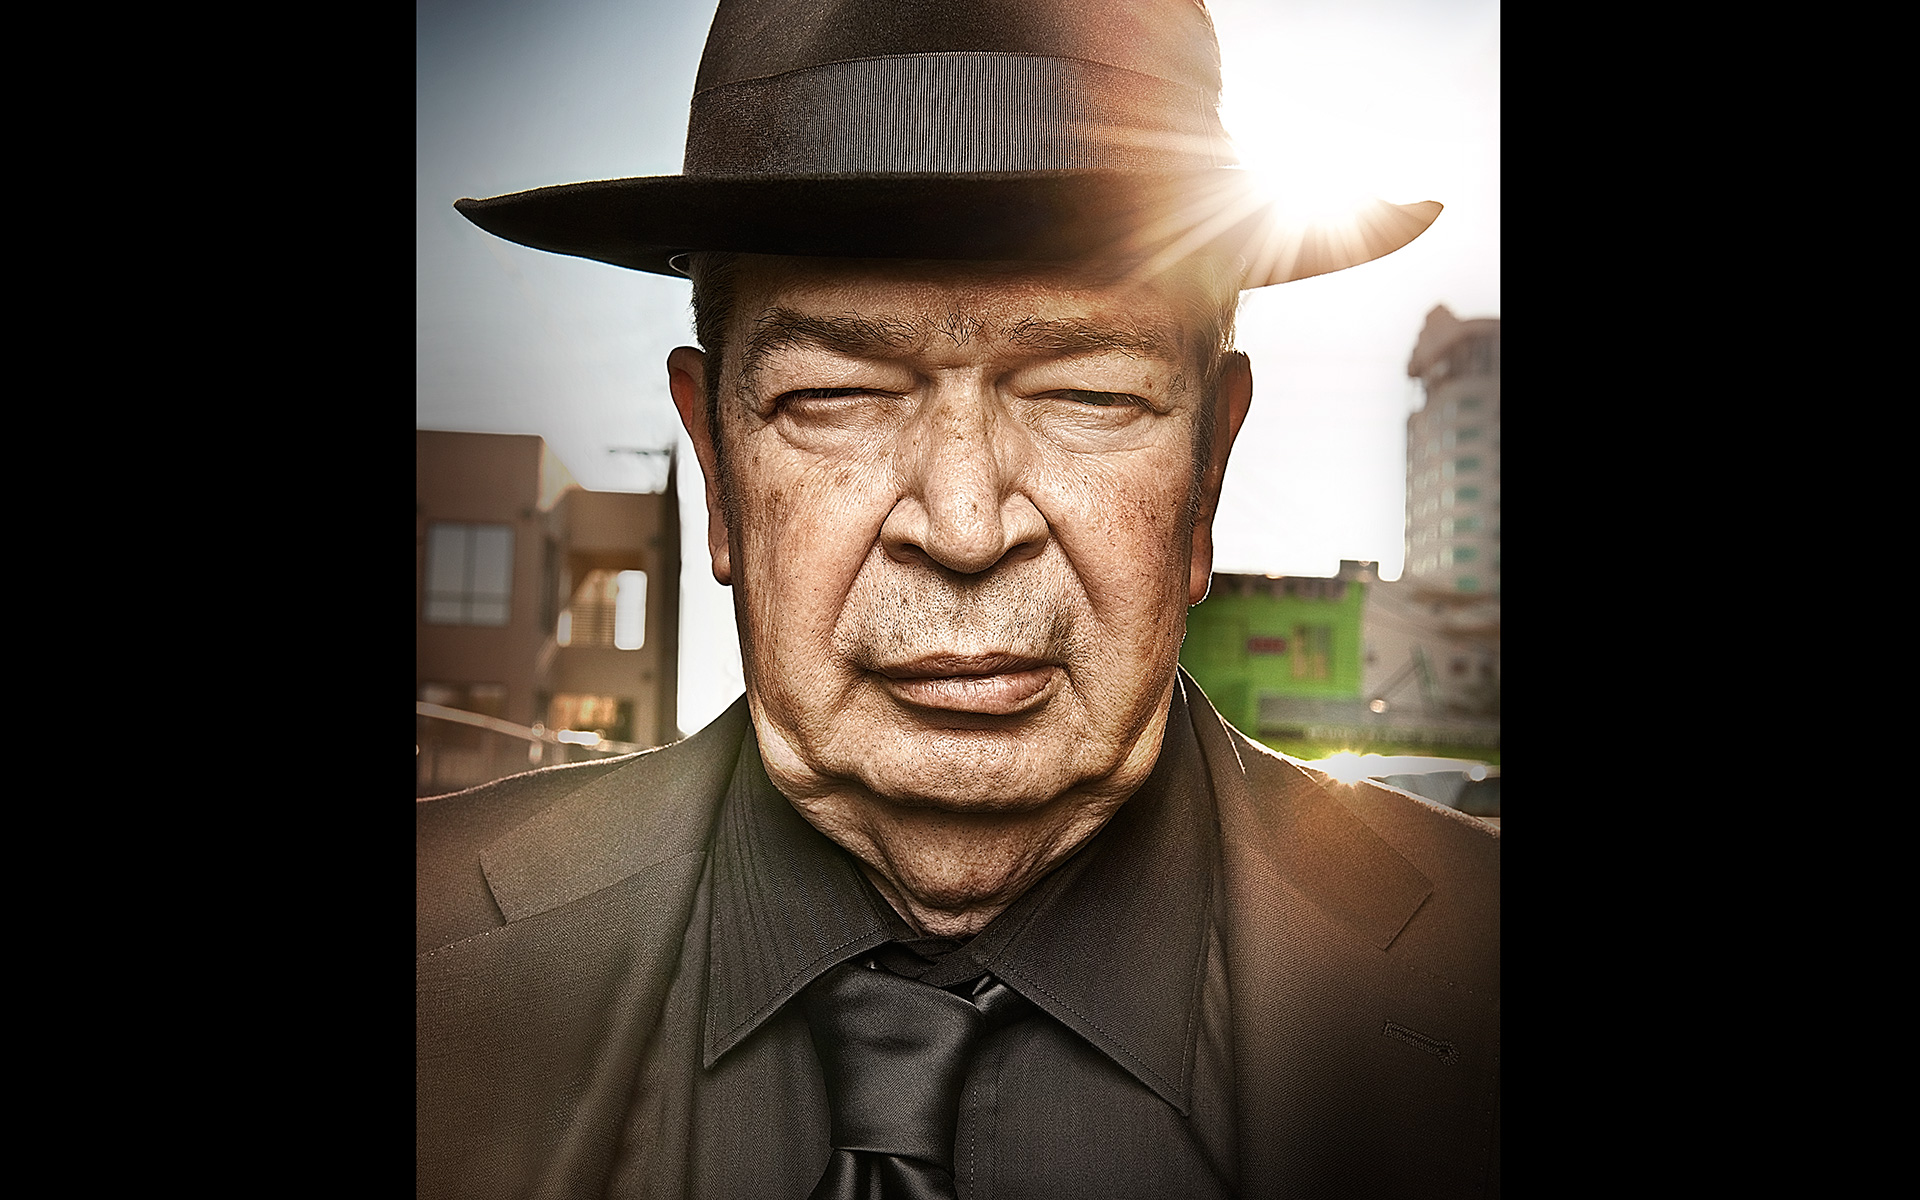 Pawn Stars USA The History Channel ©B Bunting